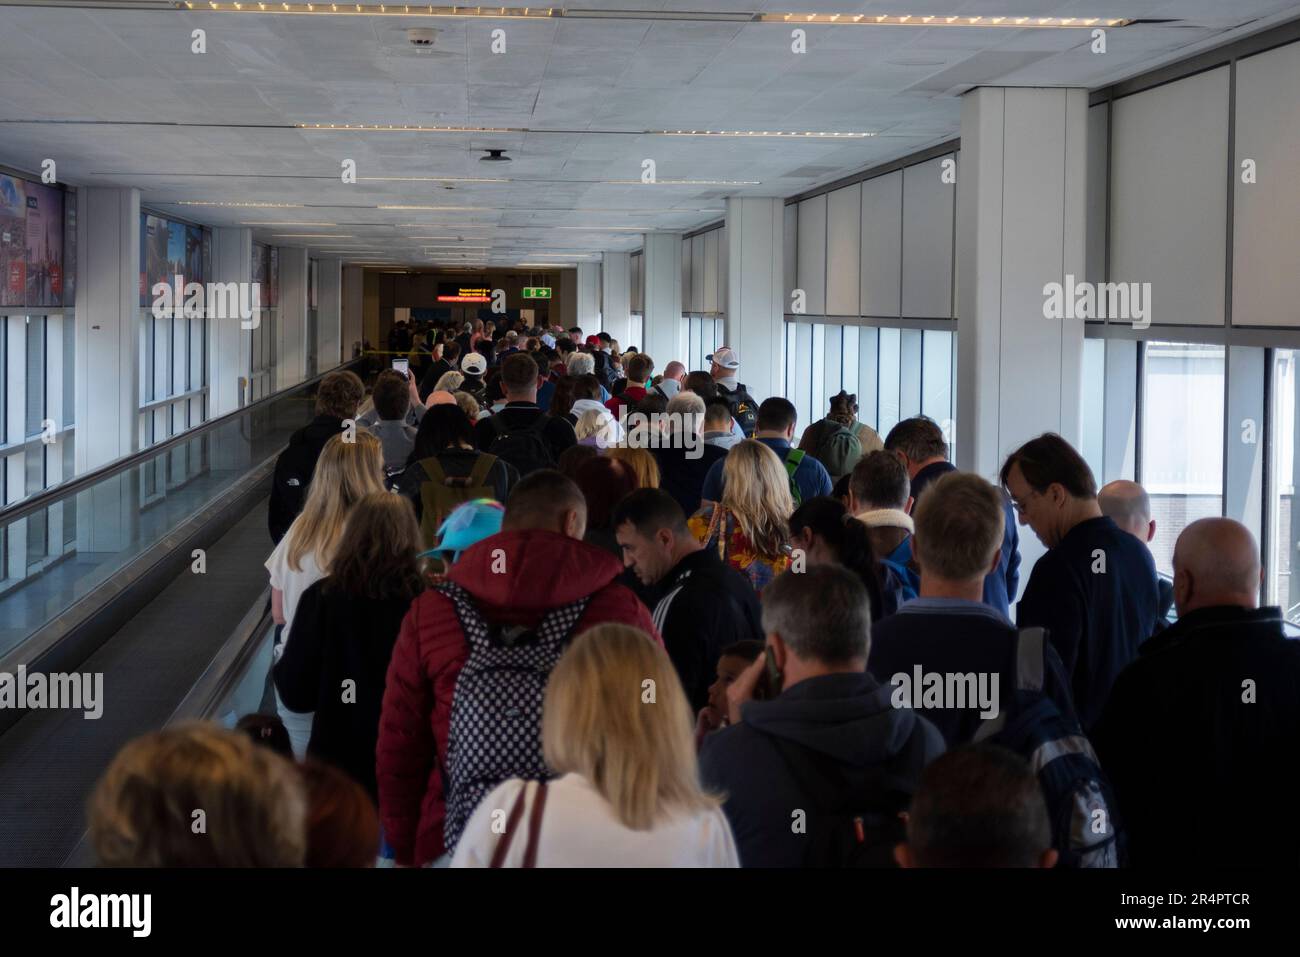 Long queues of arrival passengers delayed by failure of the automatic e gates at London Gatwick Airport, UK. People queuing in corridor Stock Photo